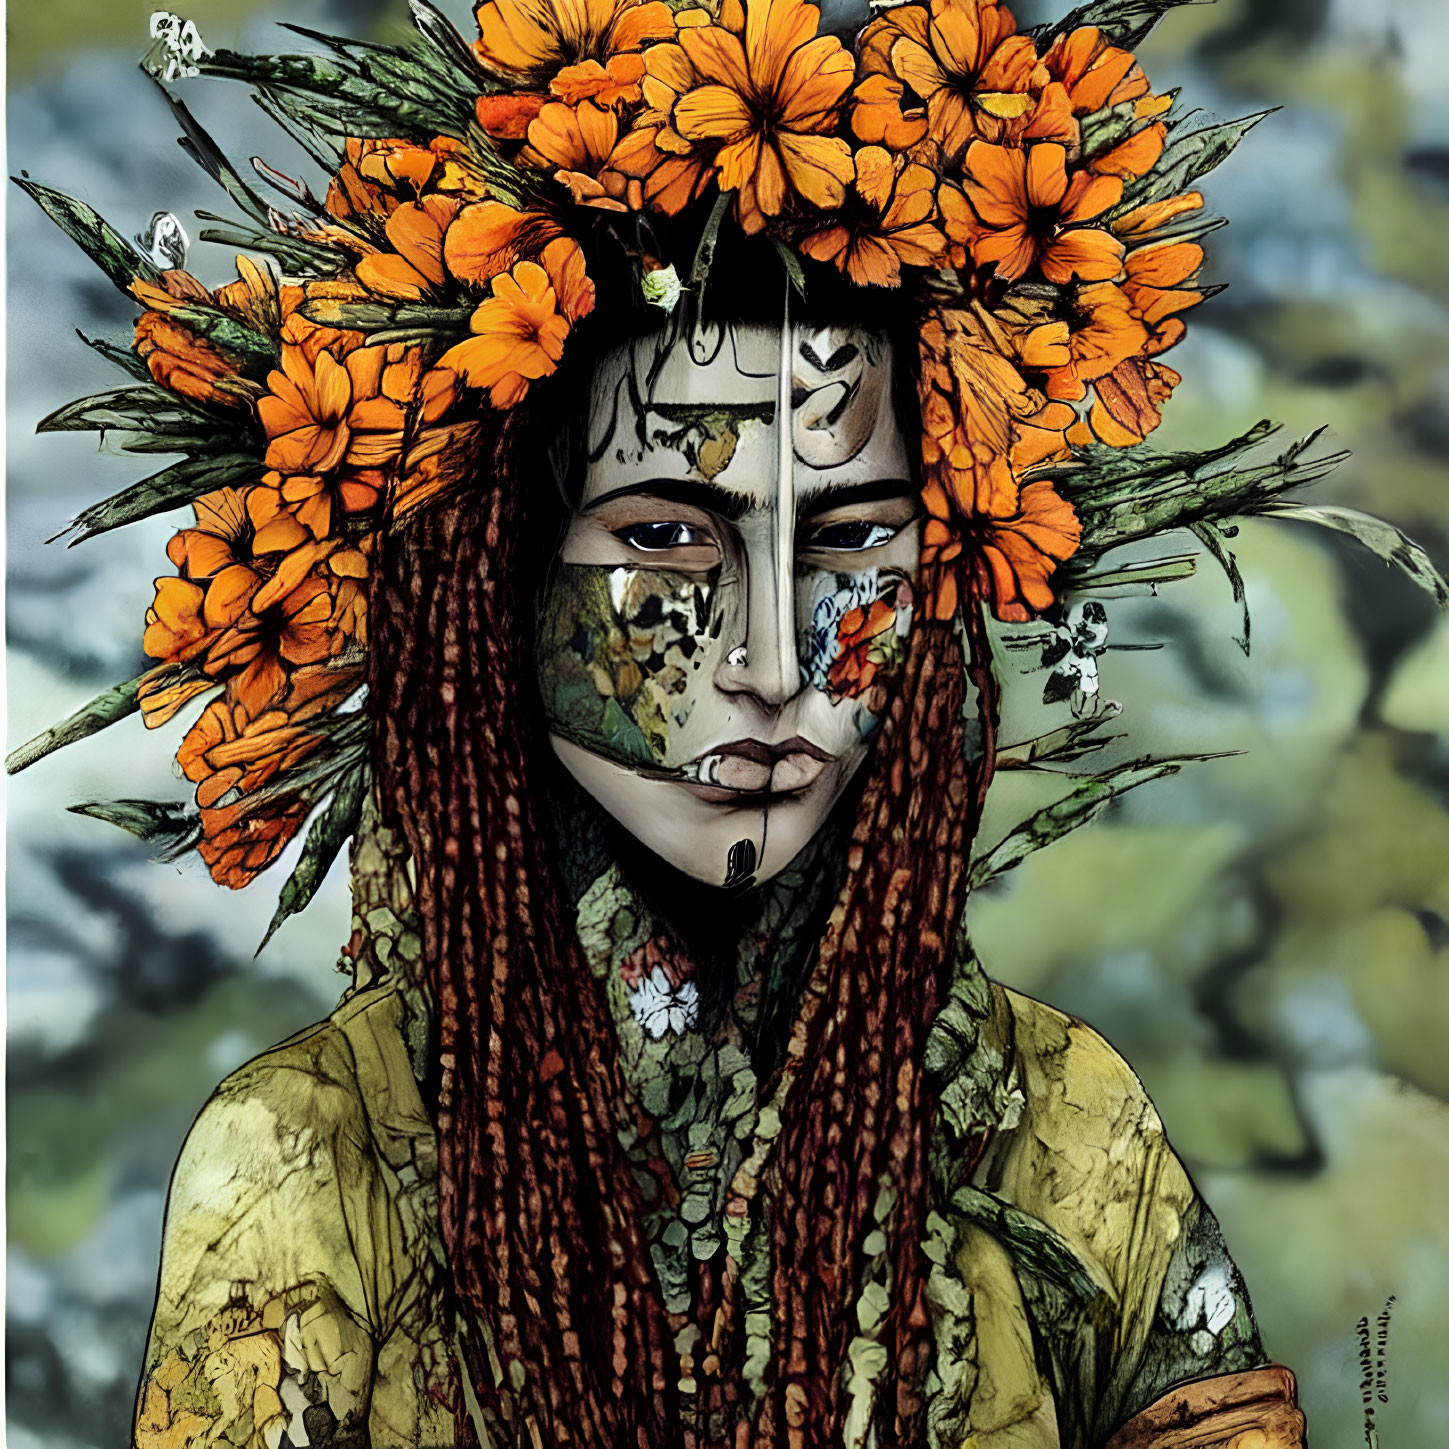 Elaborate Floral Headdress and Face Paint on Person with Braided Hair